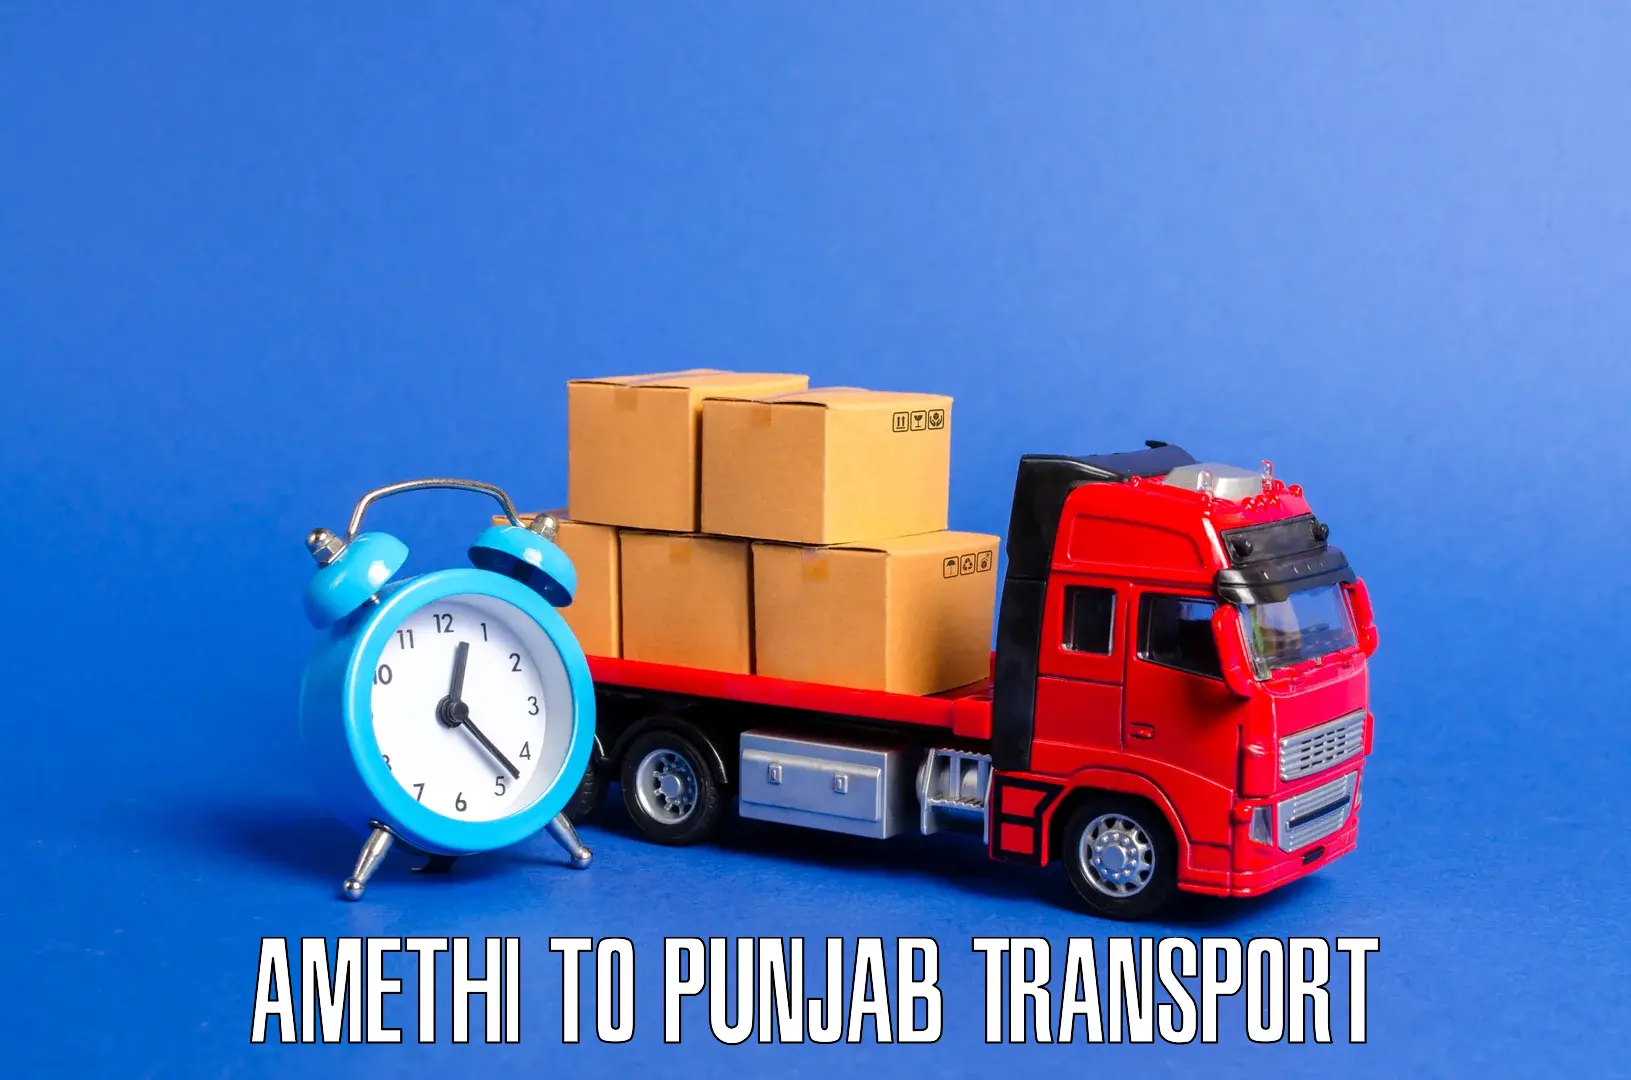 Transport shared services Amethi to Jagraon